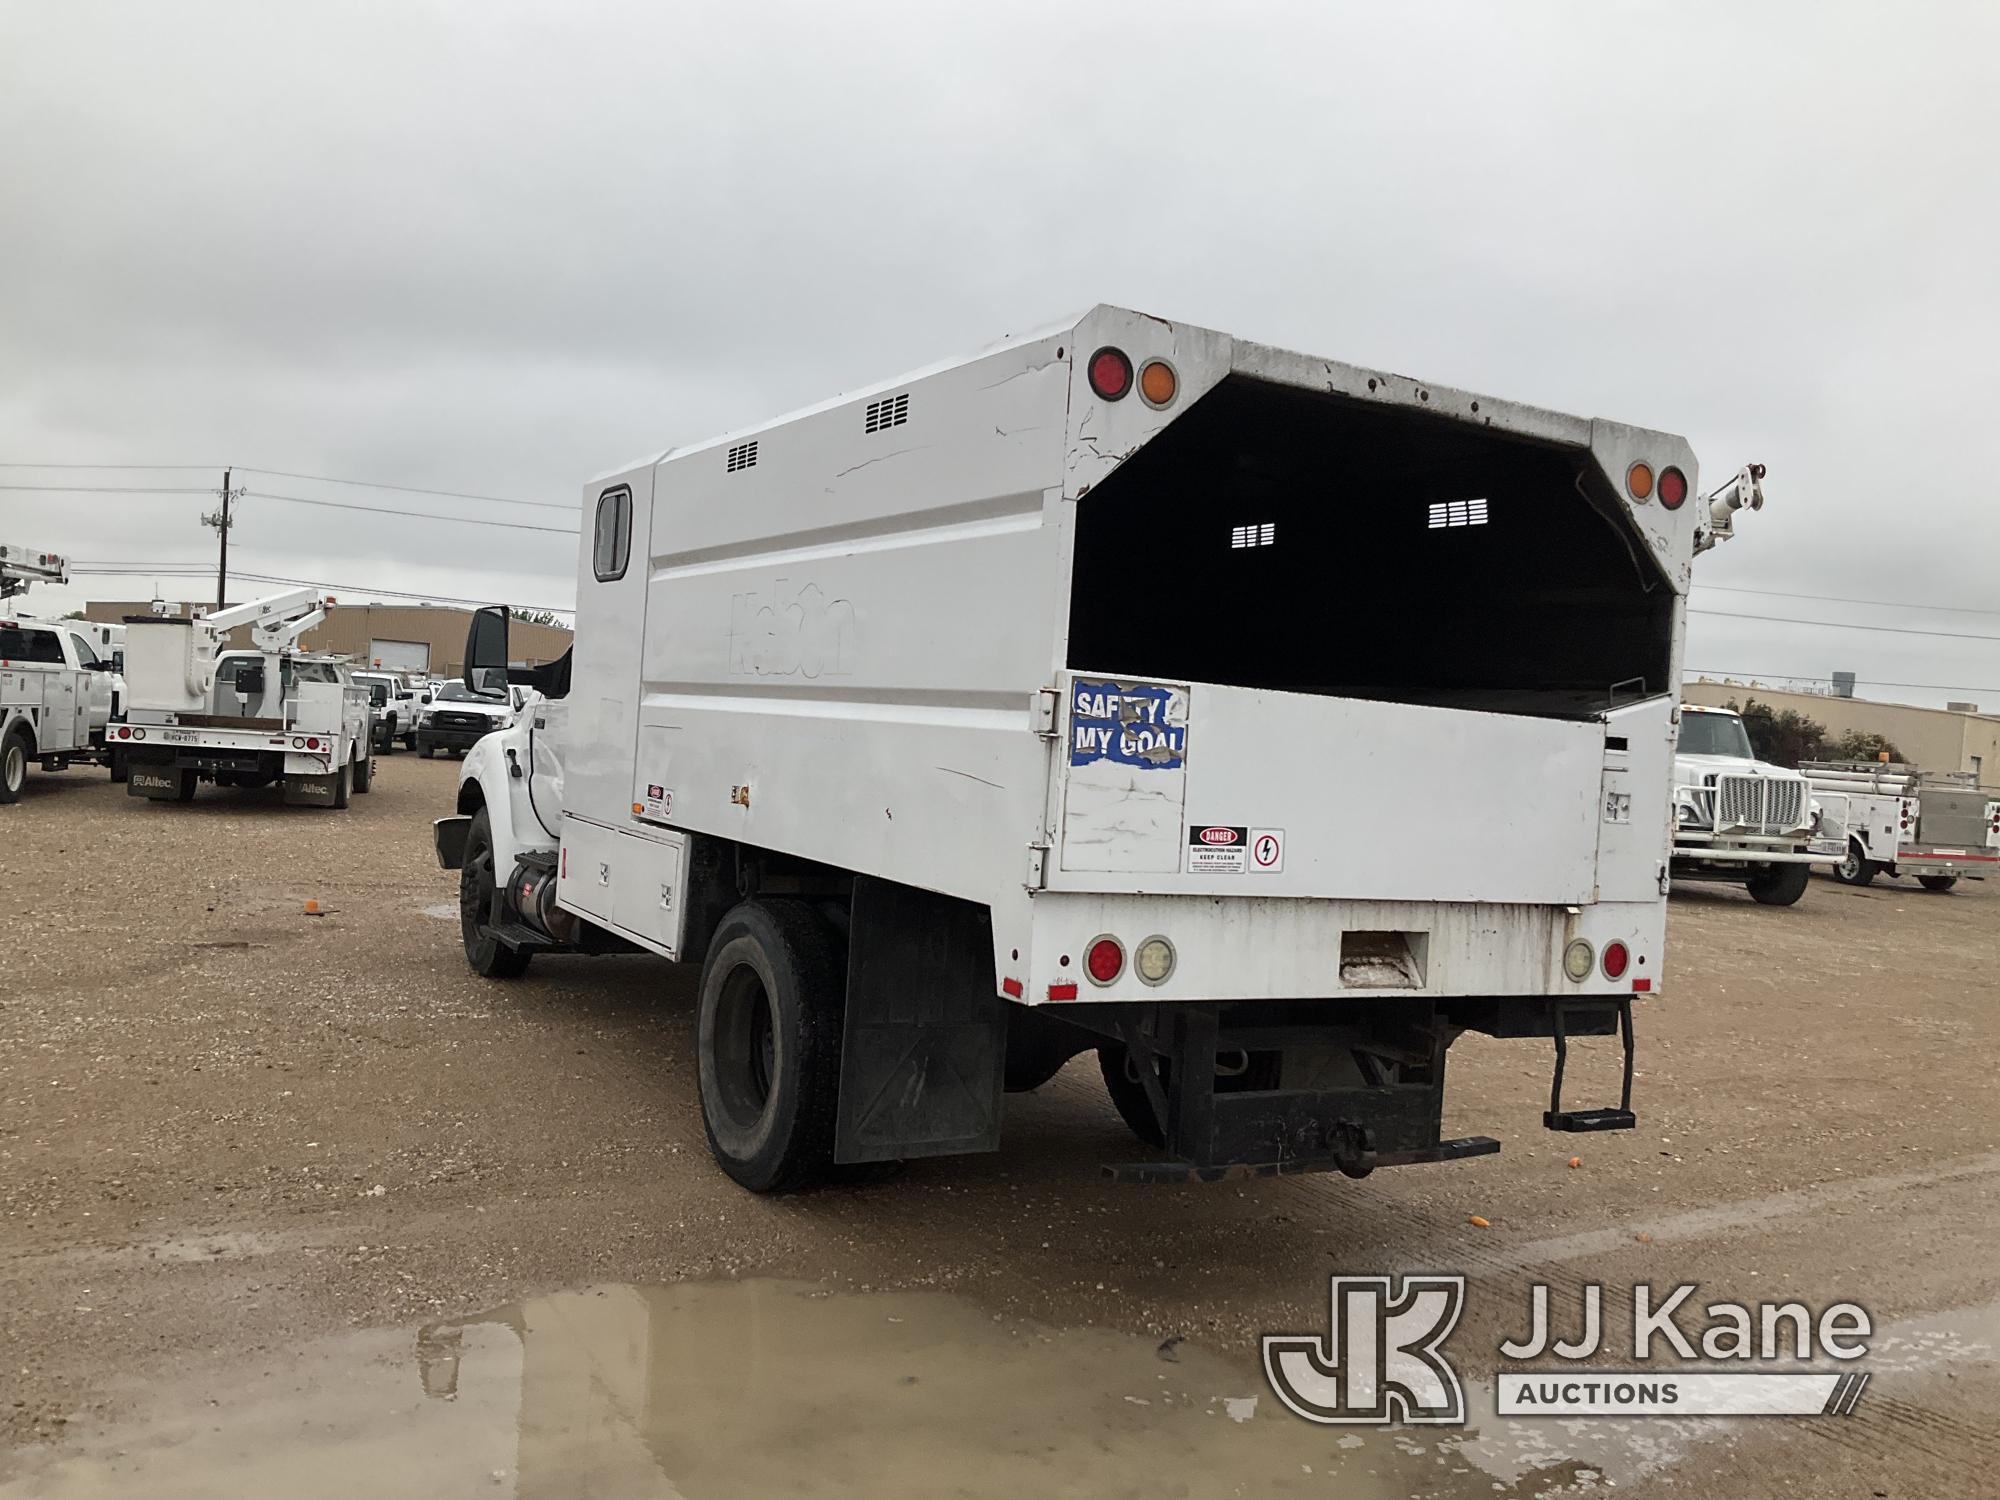 (Waxahachie, TX) 2015 Ford F750 Chipper Dump Truck Runs & Moves) (Check Engine Light On, Body Damage